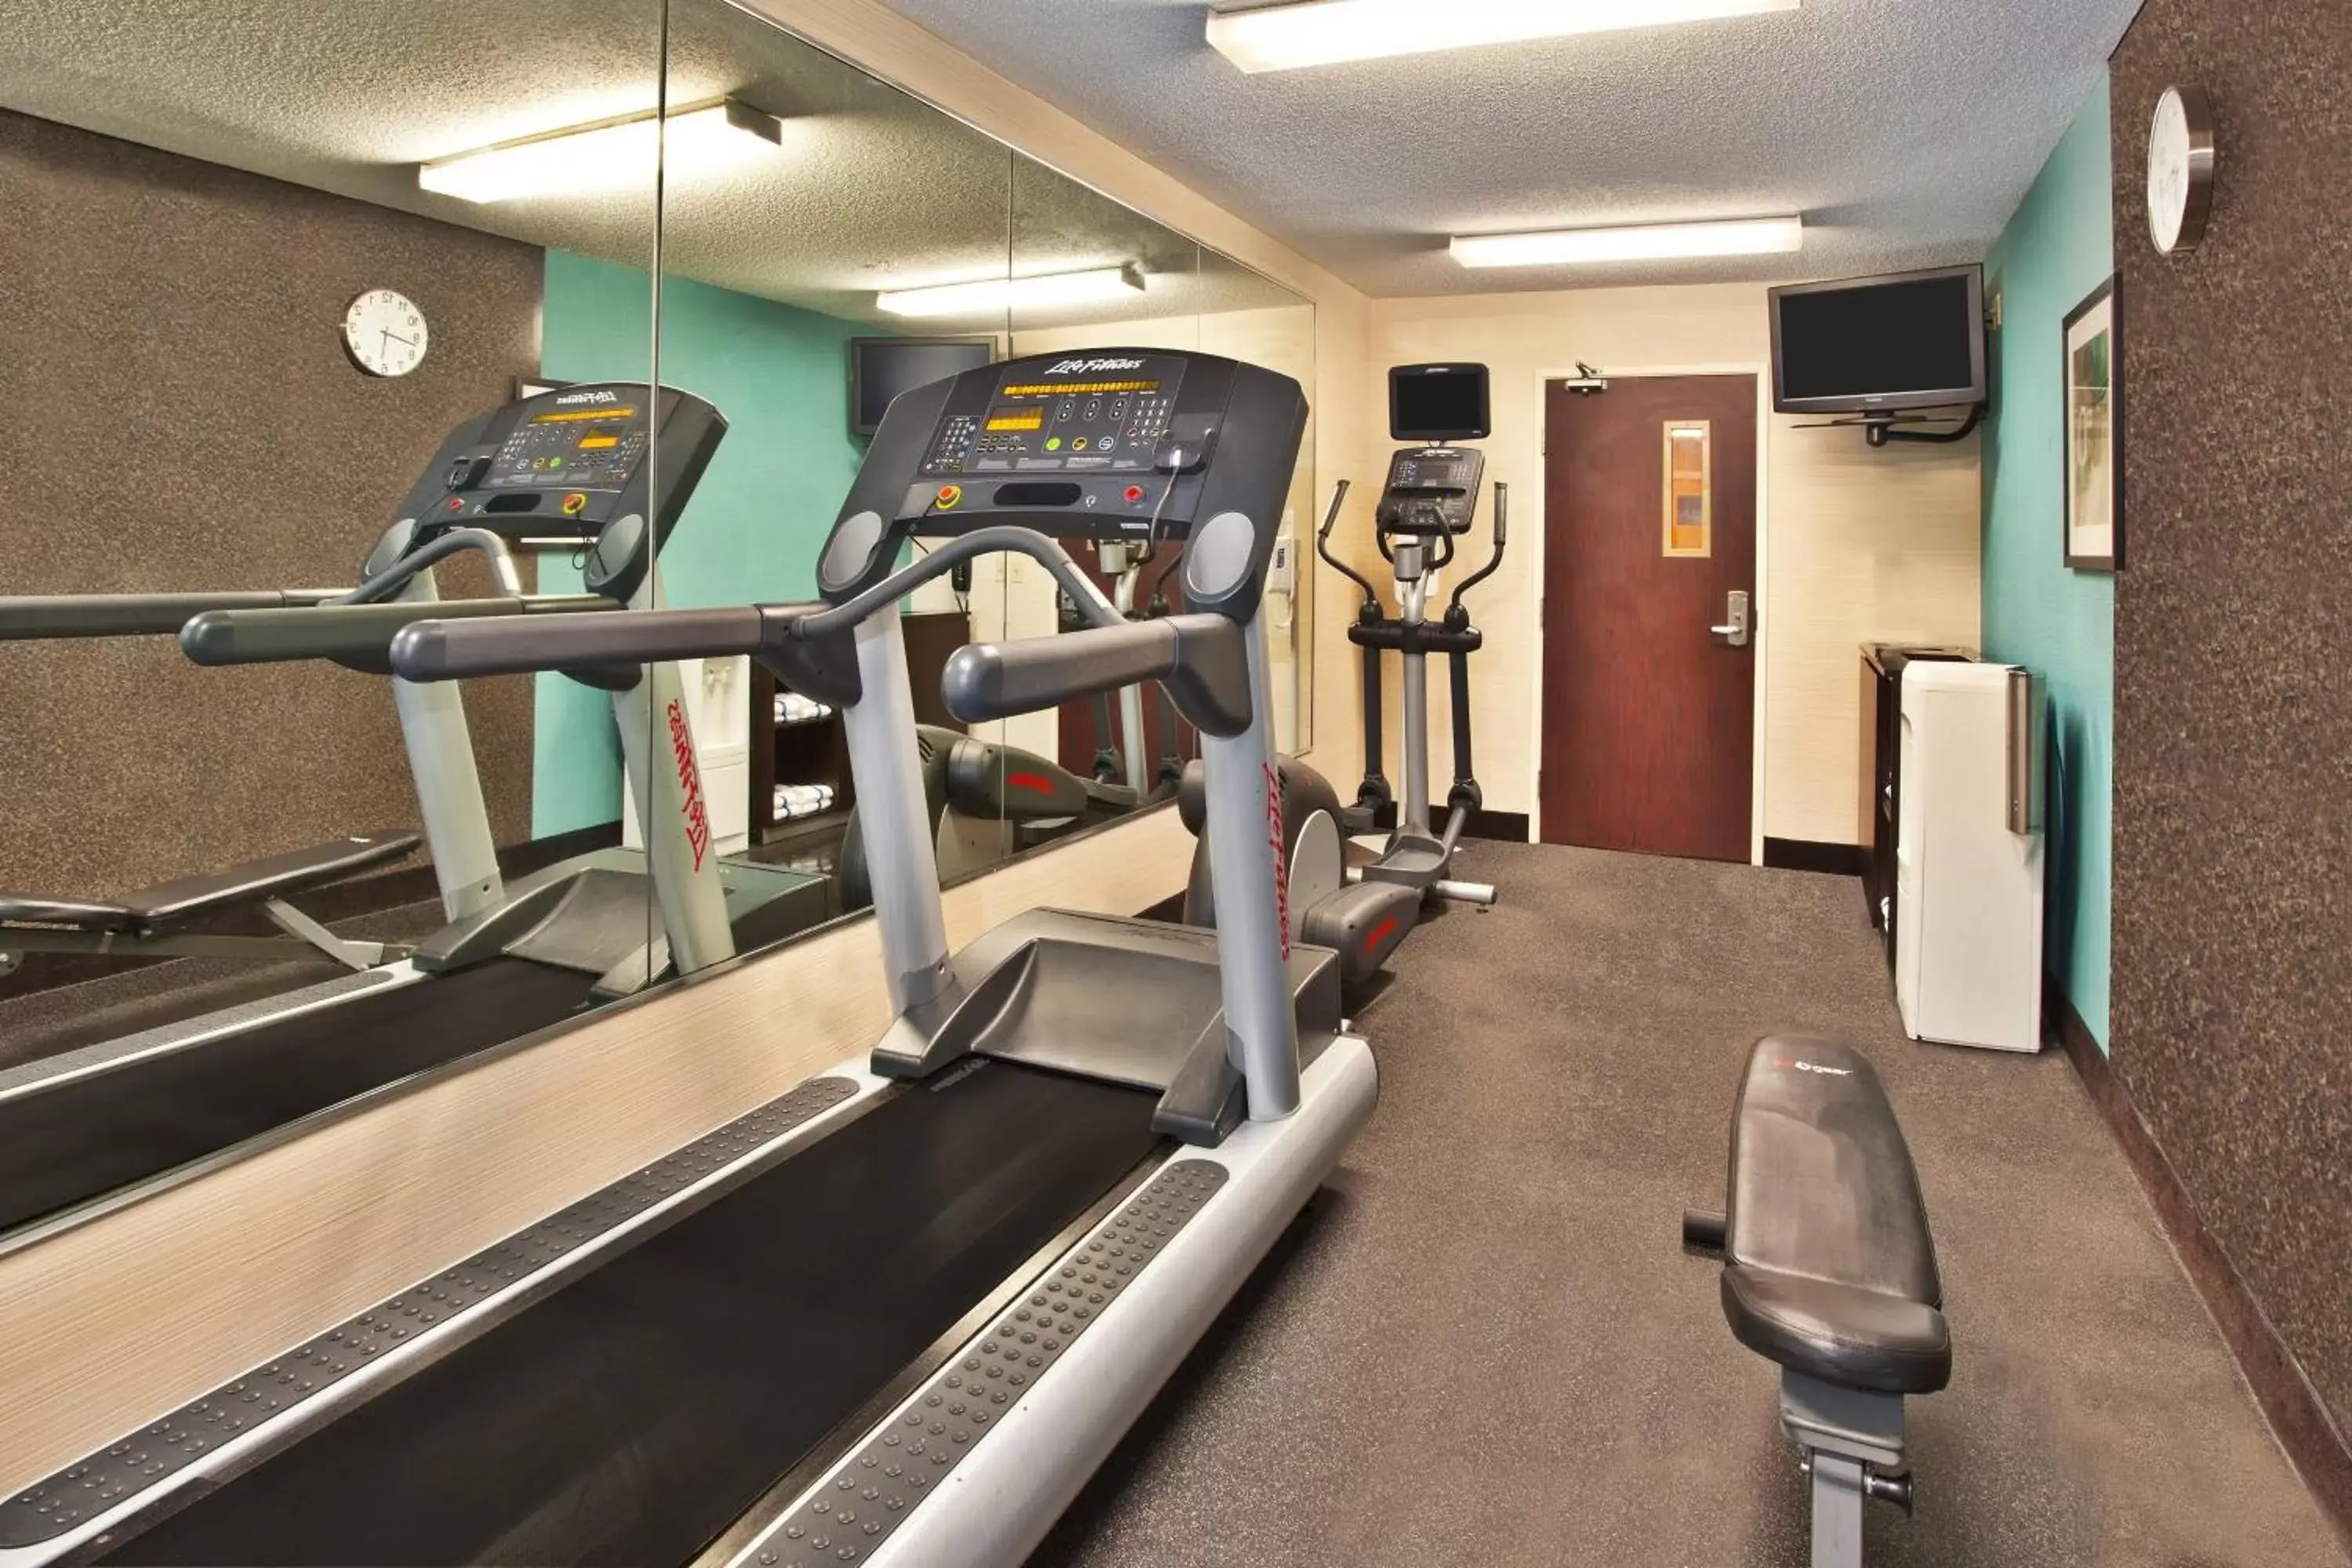 Fitness centre/facilities, Fitness Center/Facilities in Fairfield by Marriott Southeast Hammond, IN